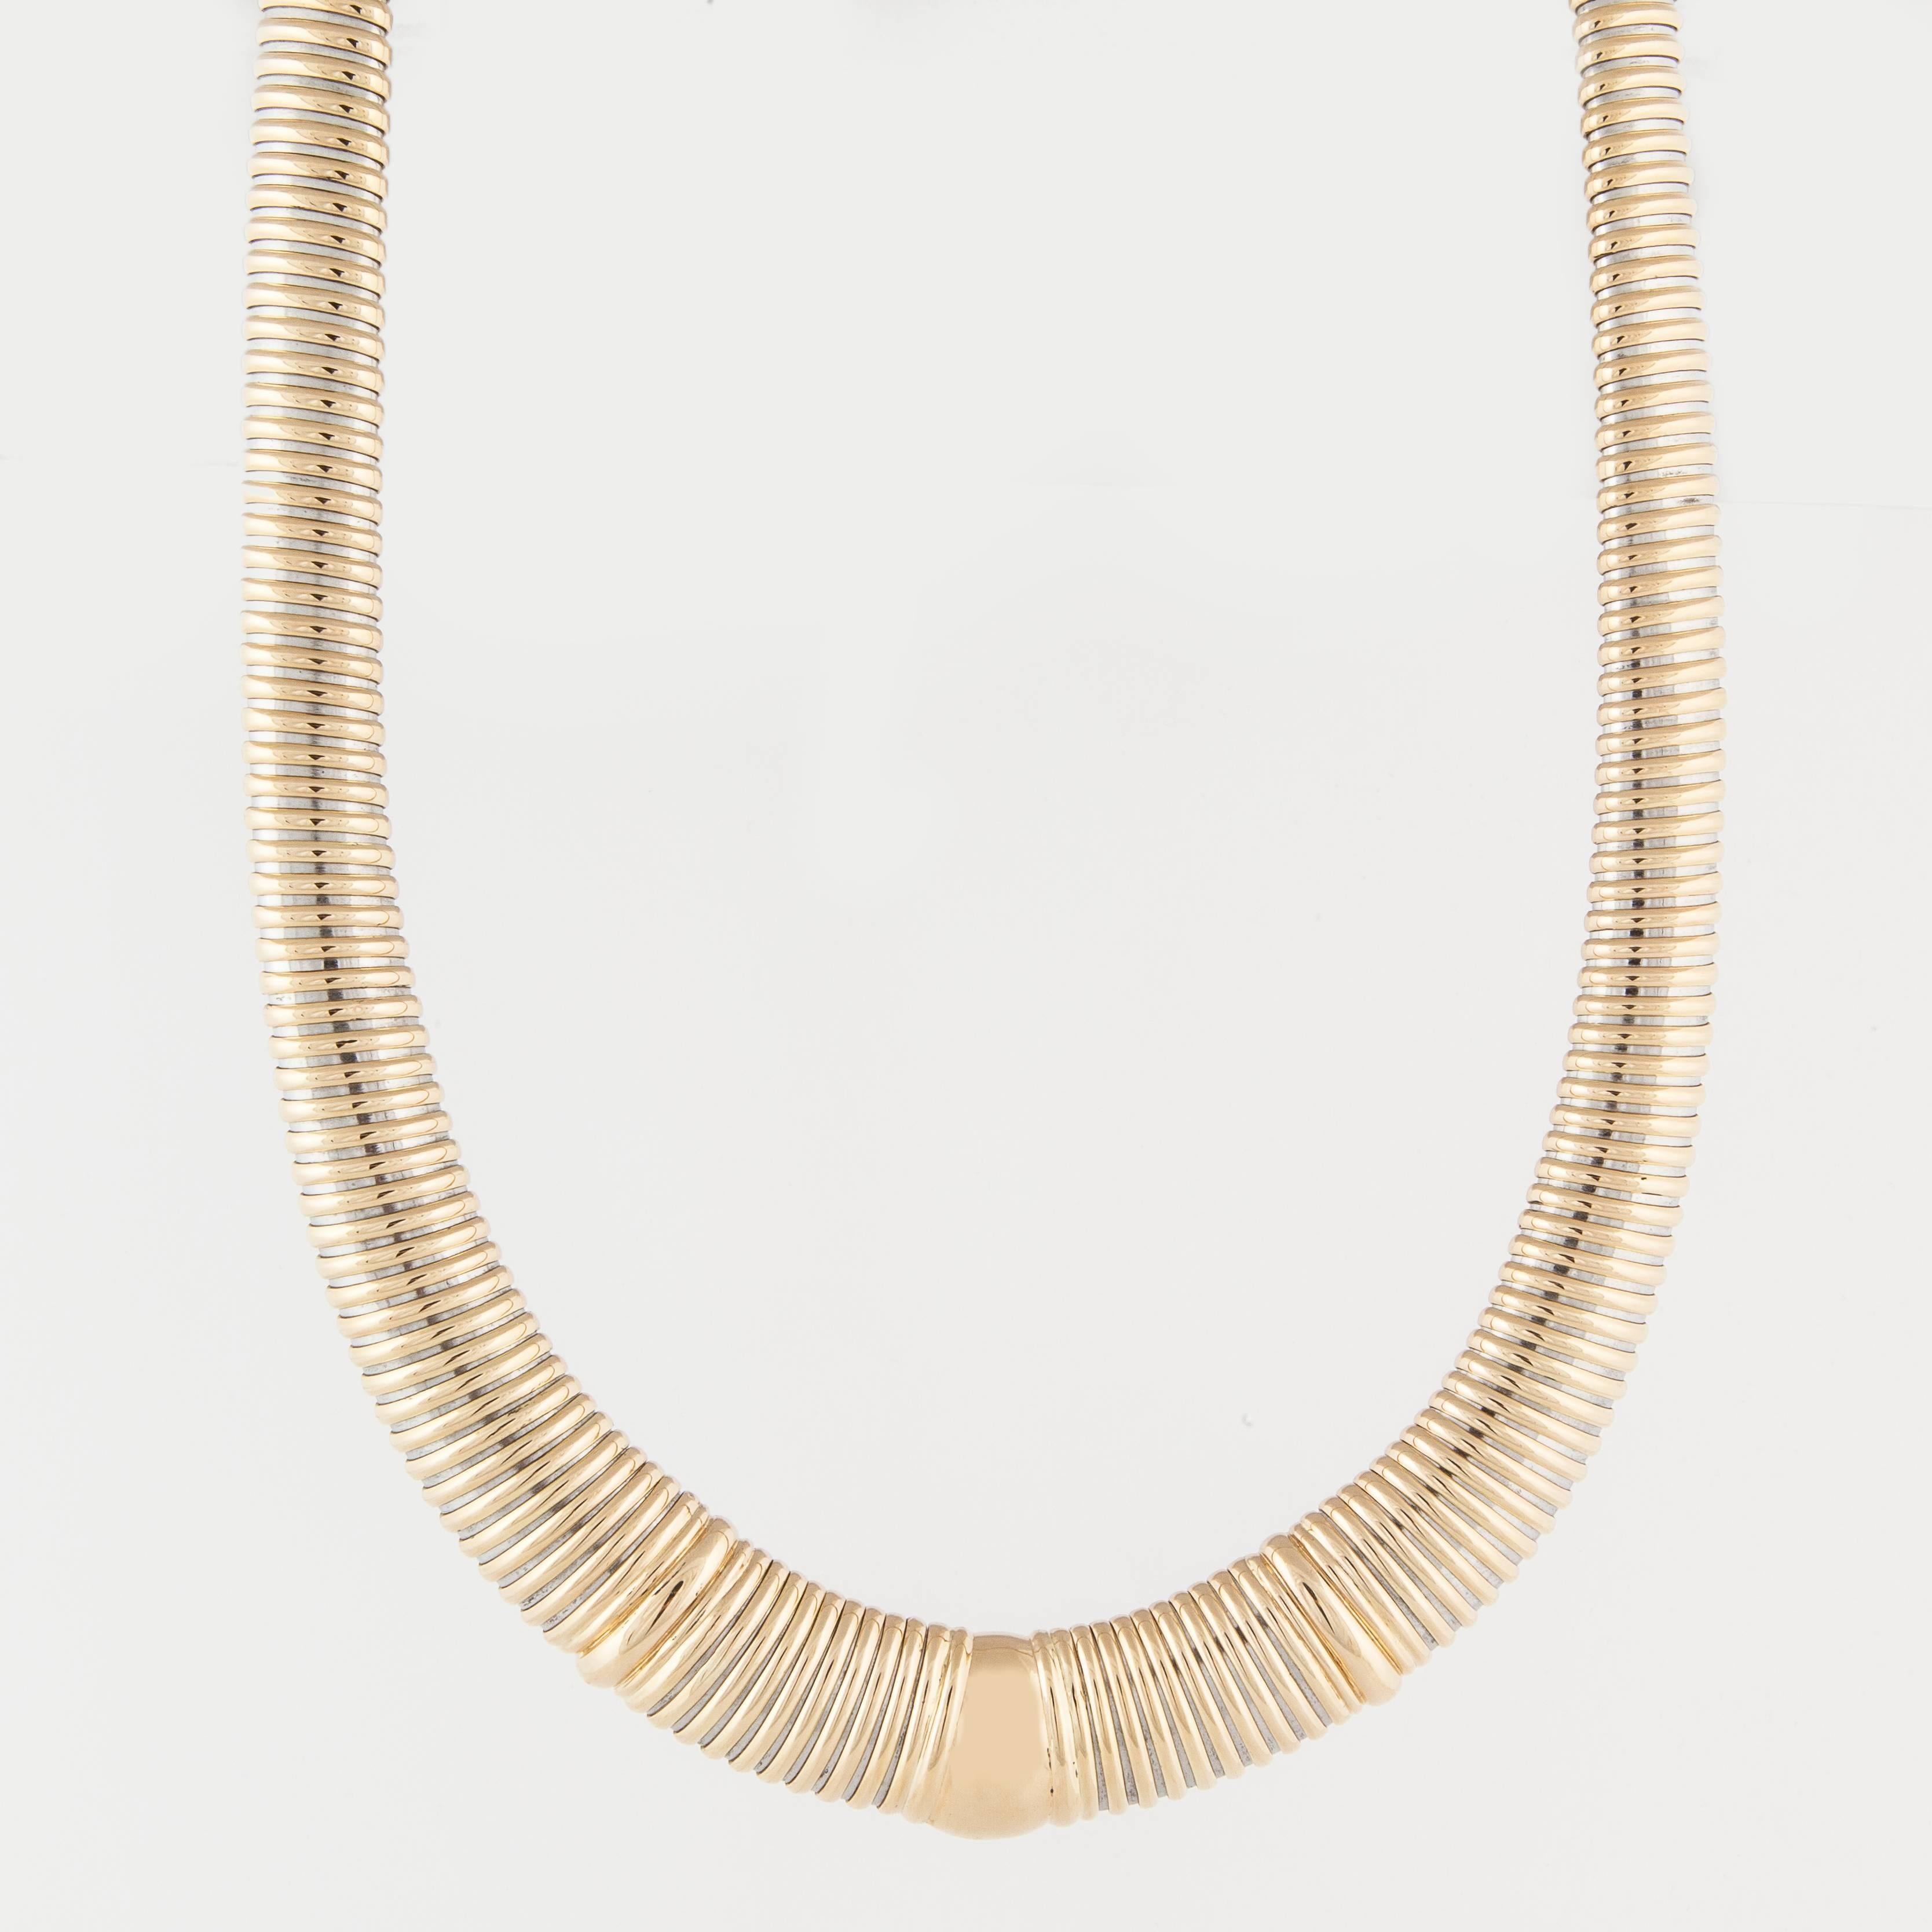 Vintage Cartier tubogas style necklace in 18K yellow gold and stainless steel.  Marked 